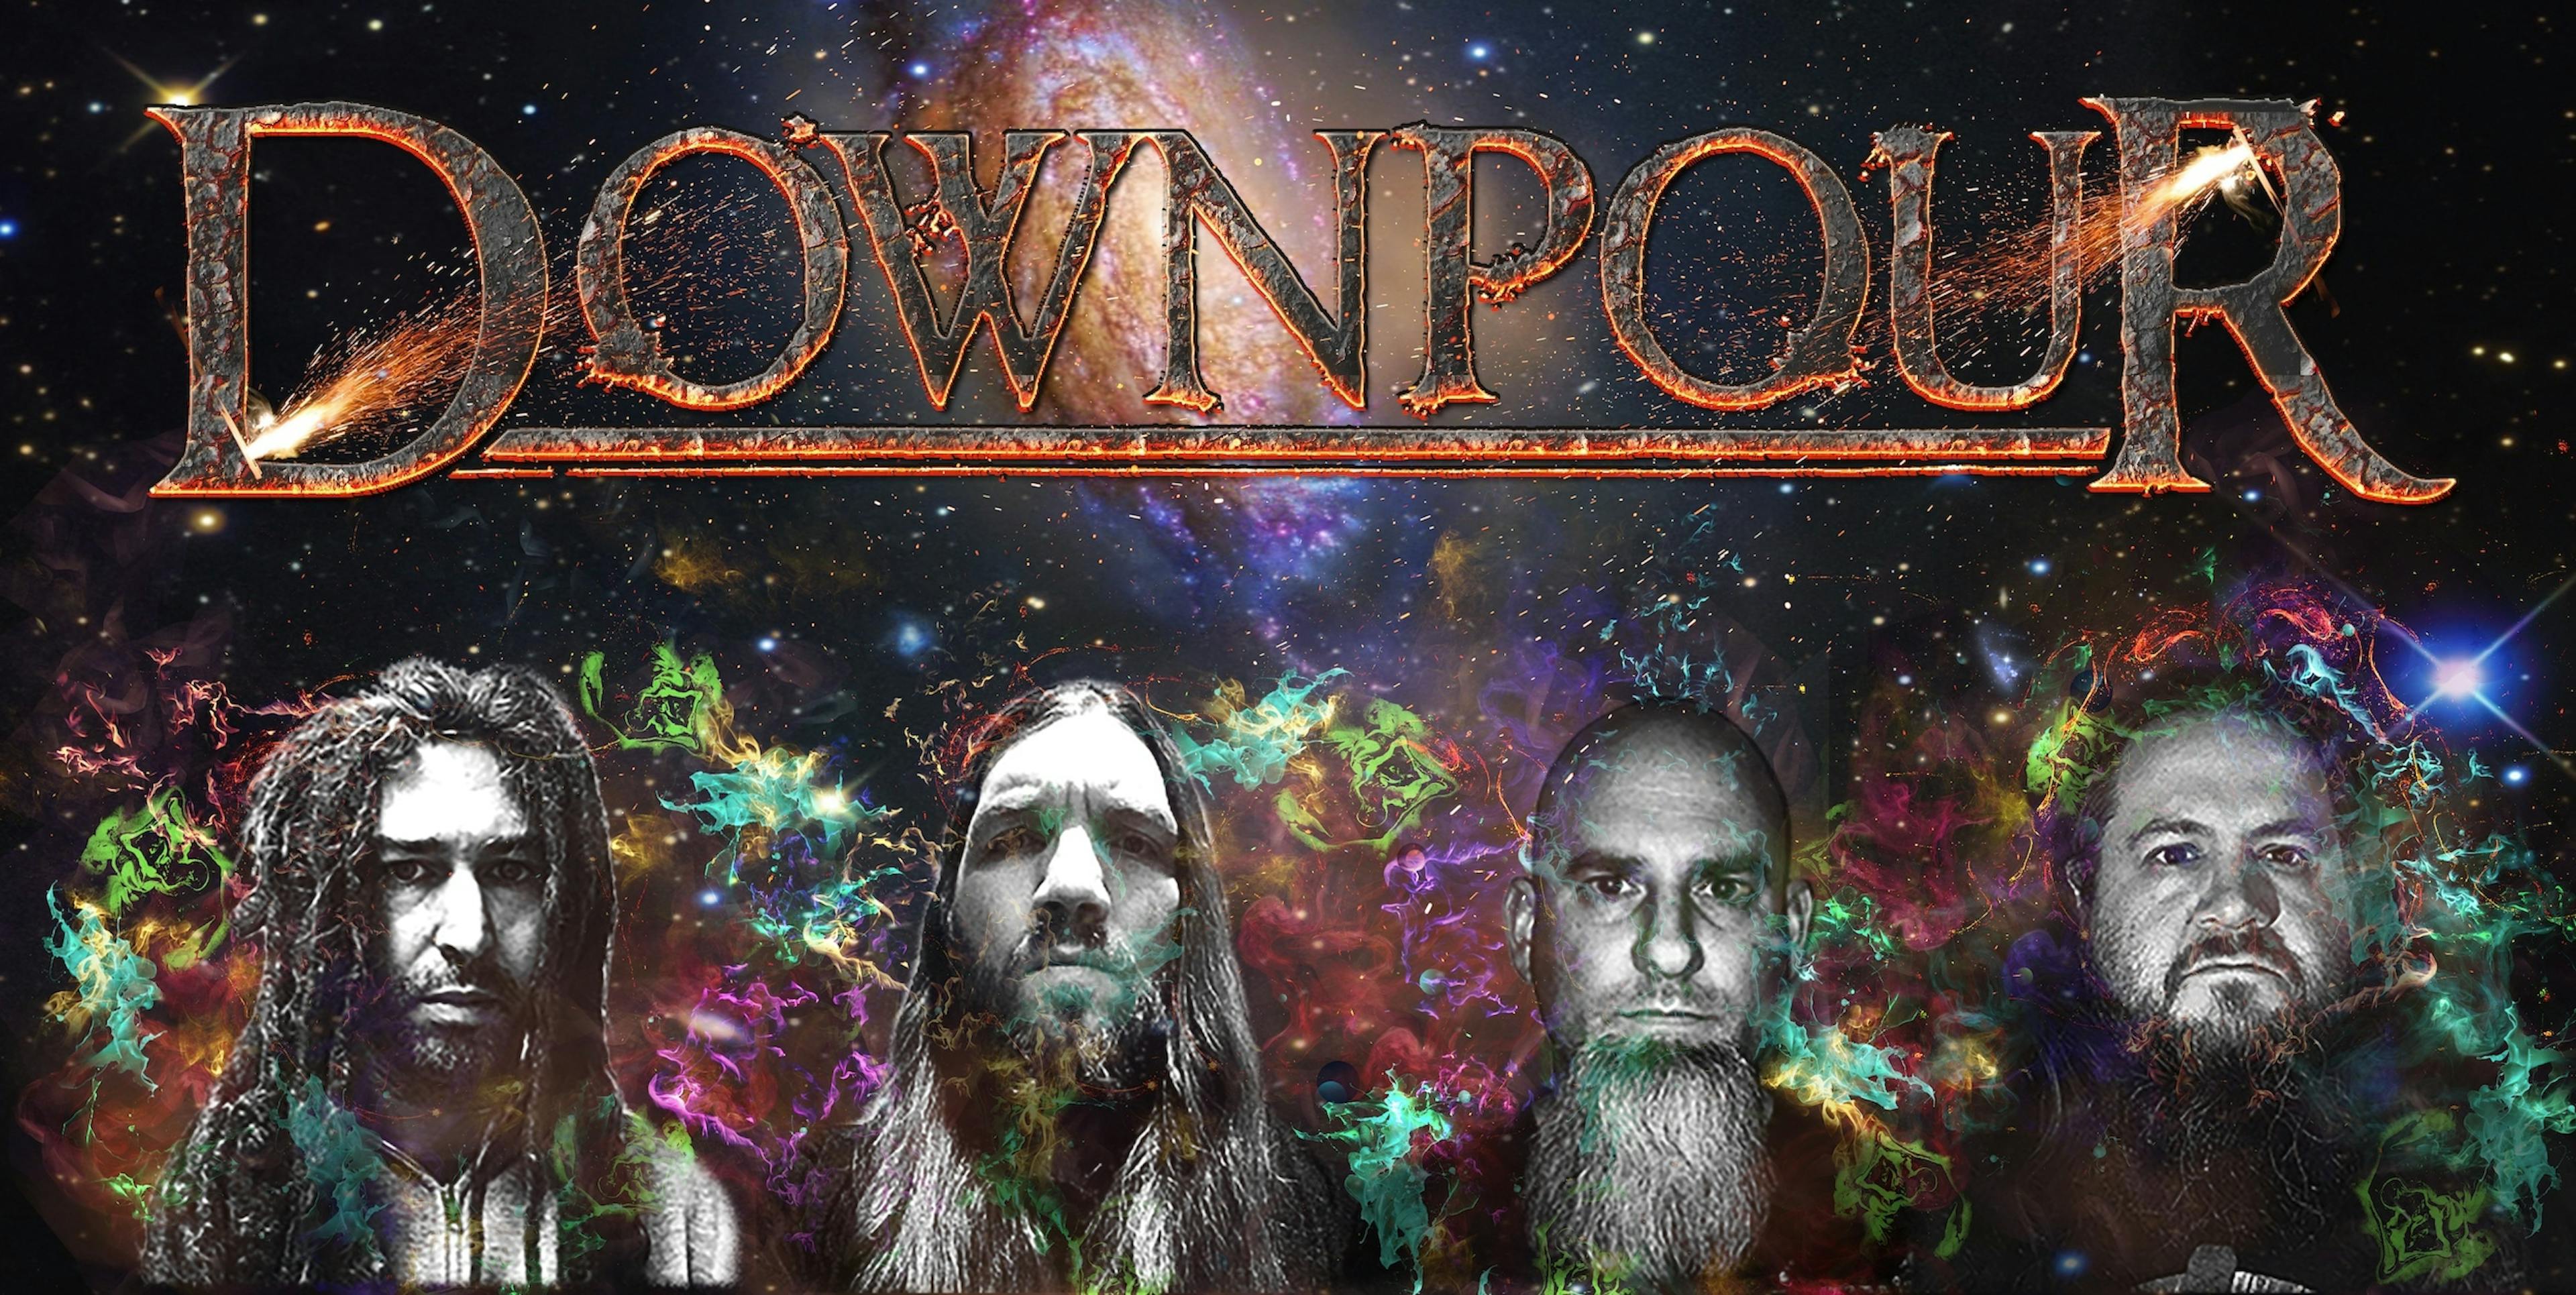 Exclusive: Downpour (Ex-Shadows Fall and Ex-Unearth) Premiere Debut Self-Titled Album